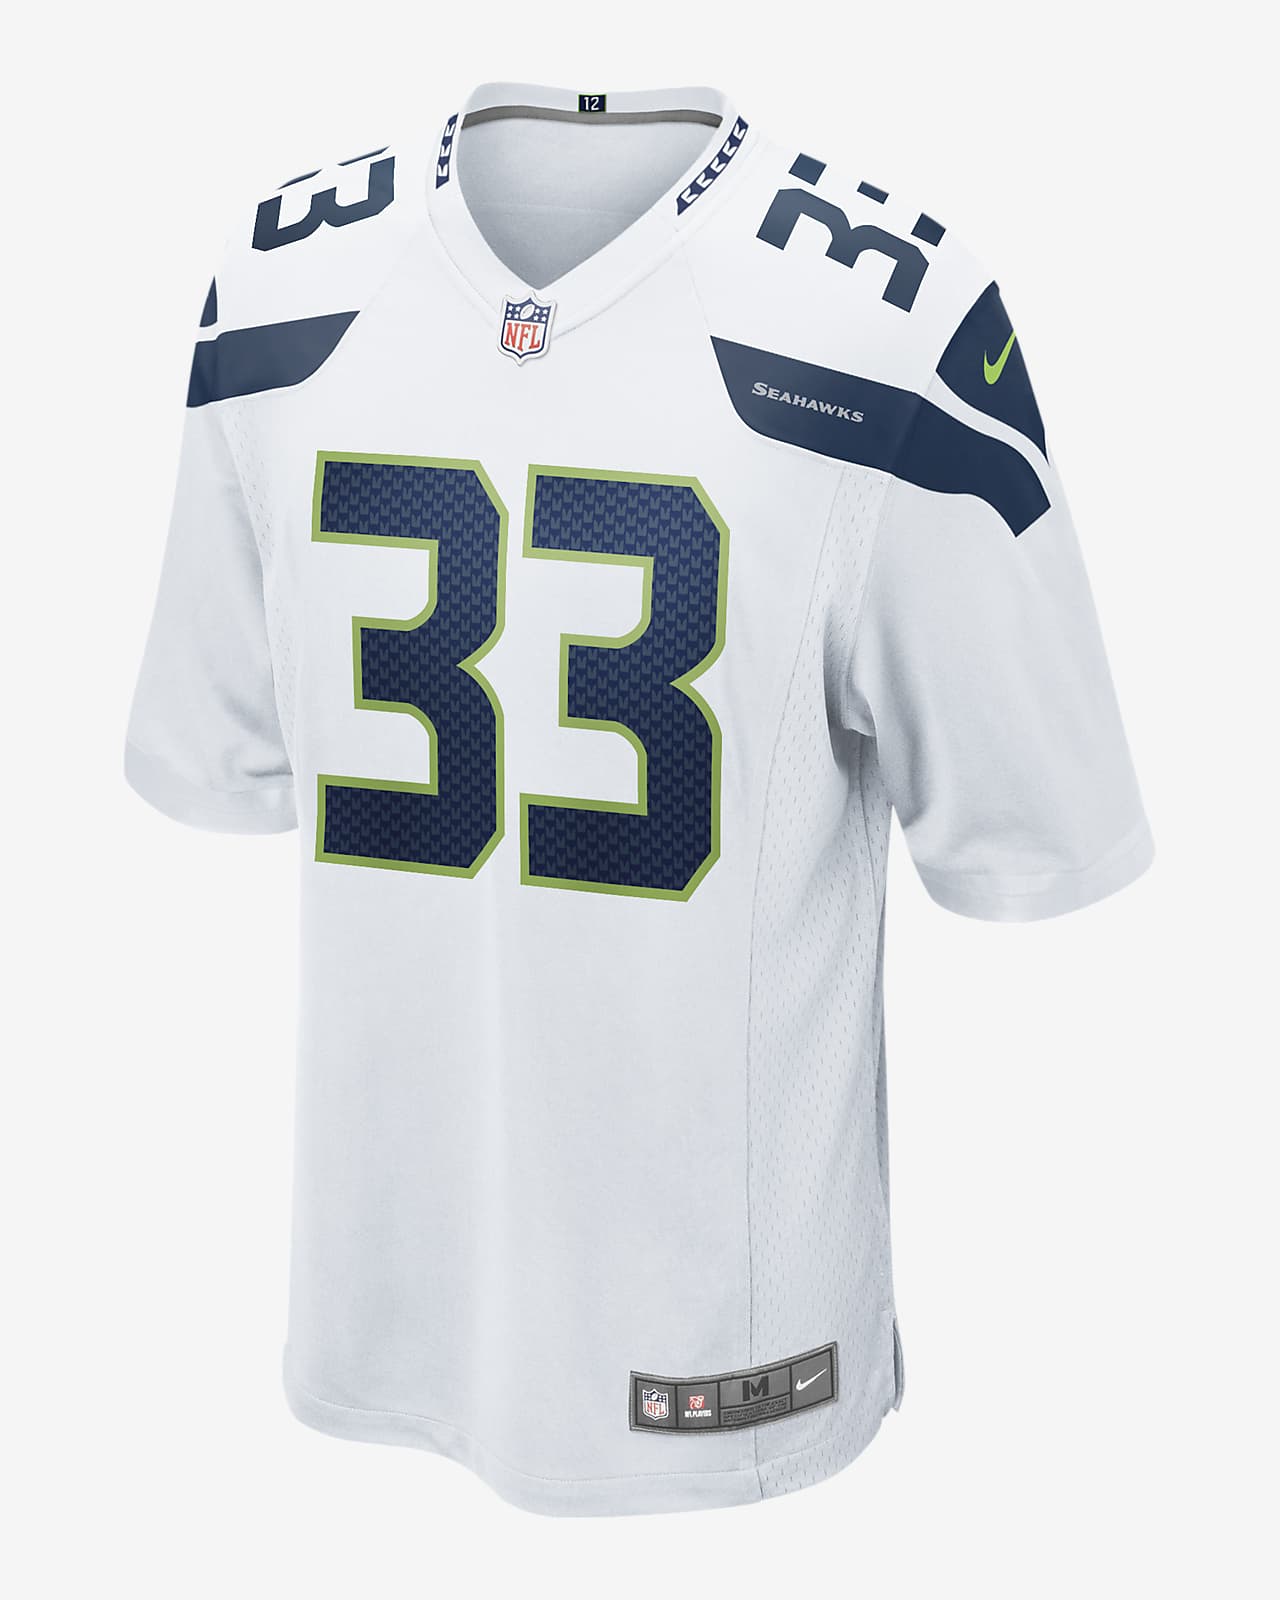 seahawks youth xl jersey